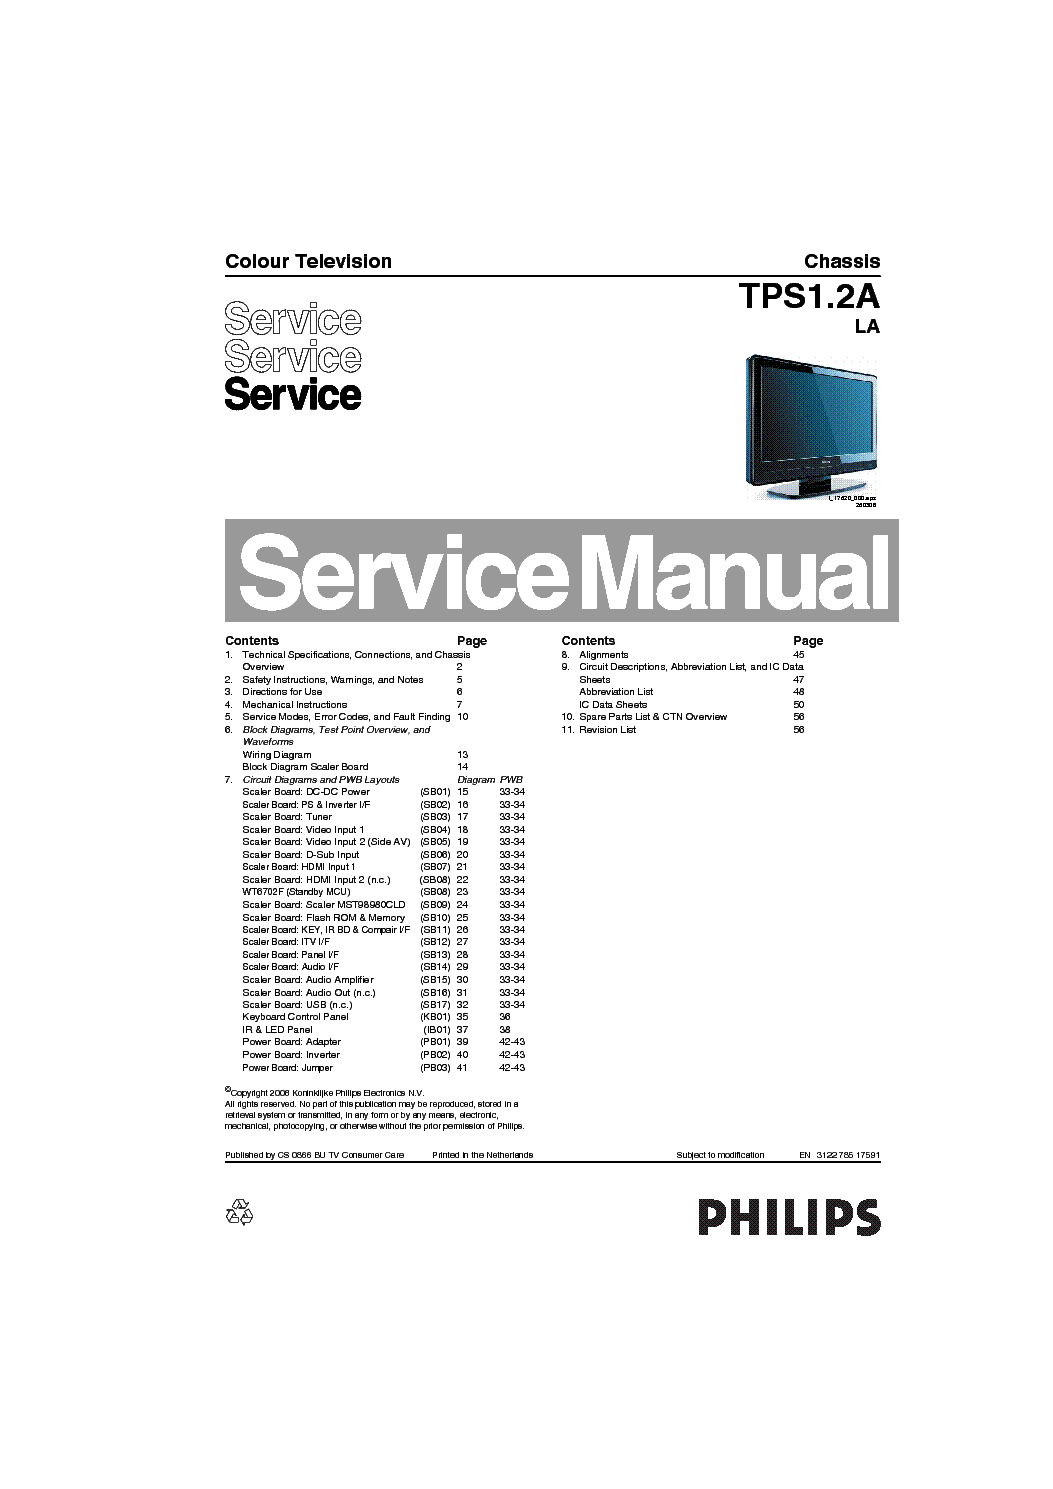 PHILIPS TPS1.2A-LA CHASSIS SM service manual (1st page)